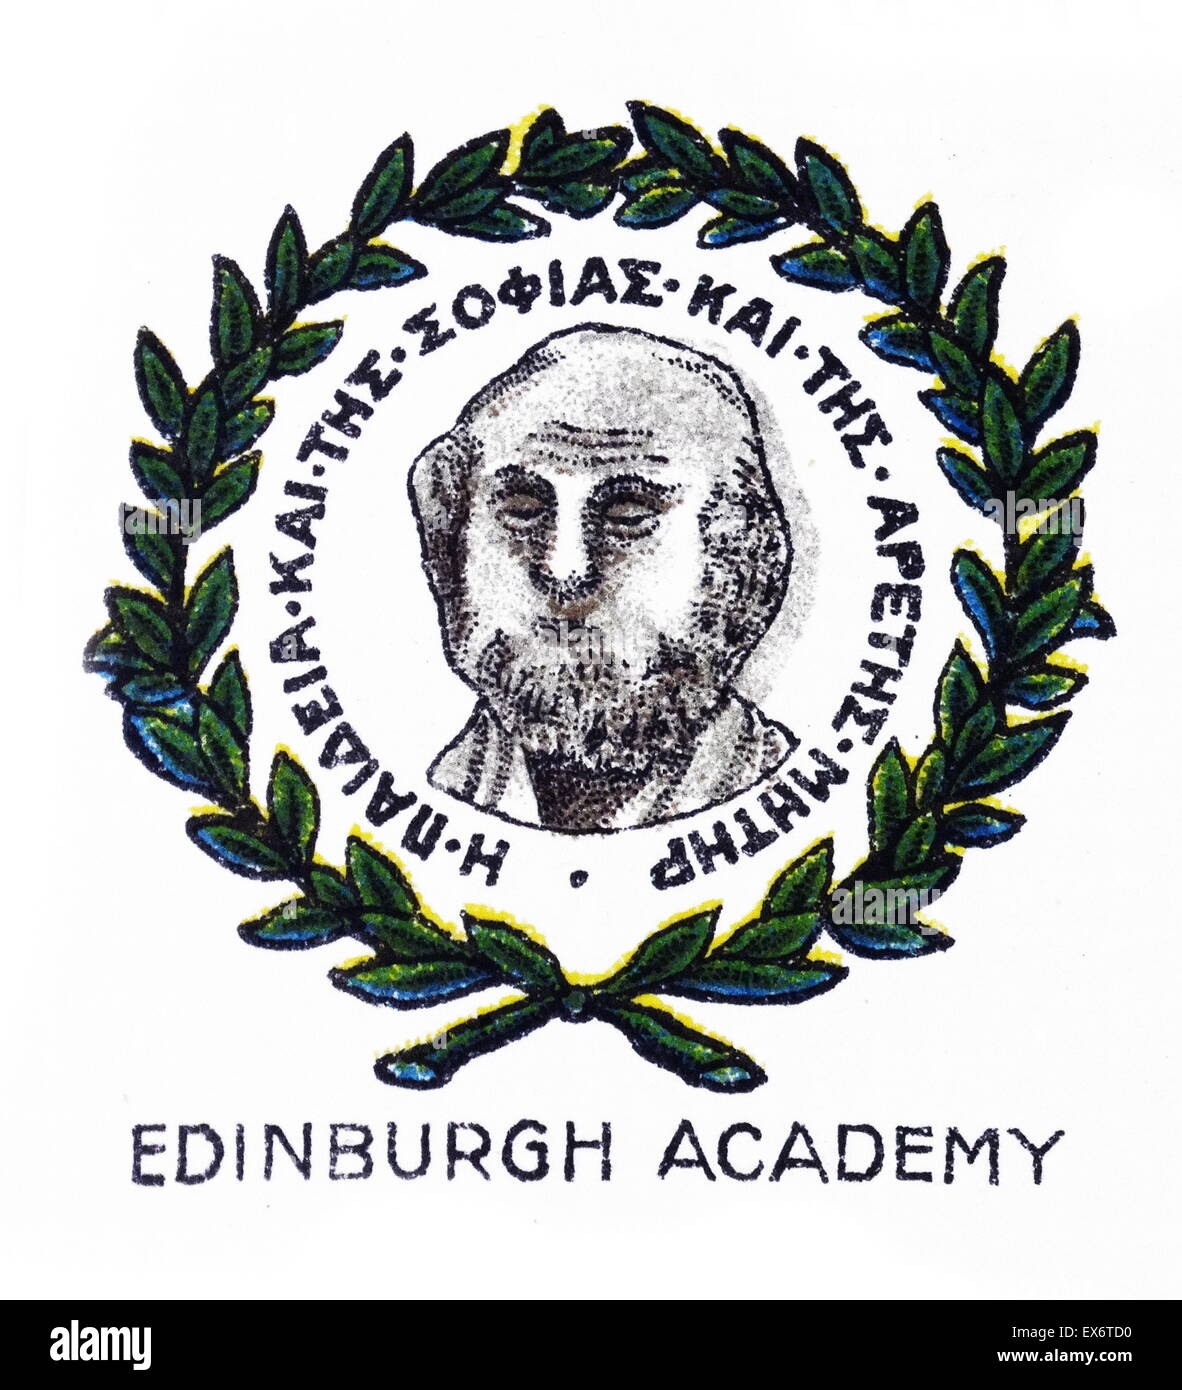 Emblem for Edinburgh Academy, Midlothian, Scotland, an independent school which was founded by Henry Cockburn, Lord Cockburn in 1823. Stock Photo